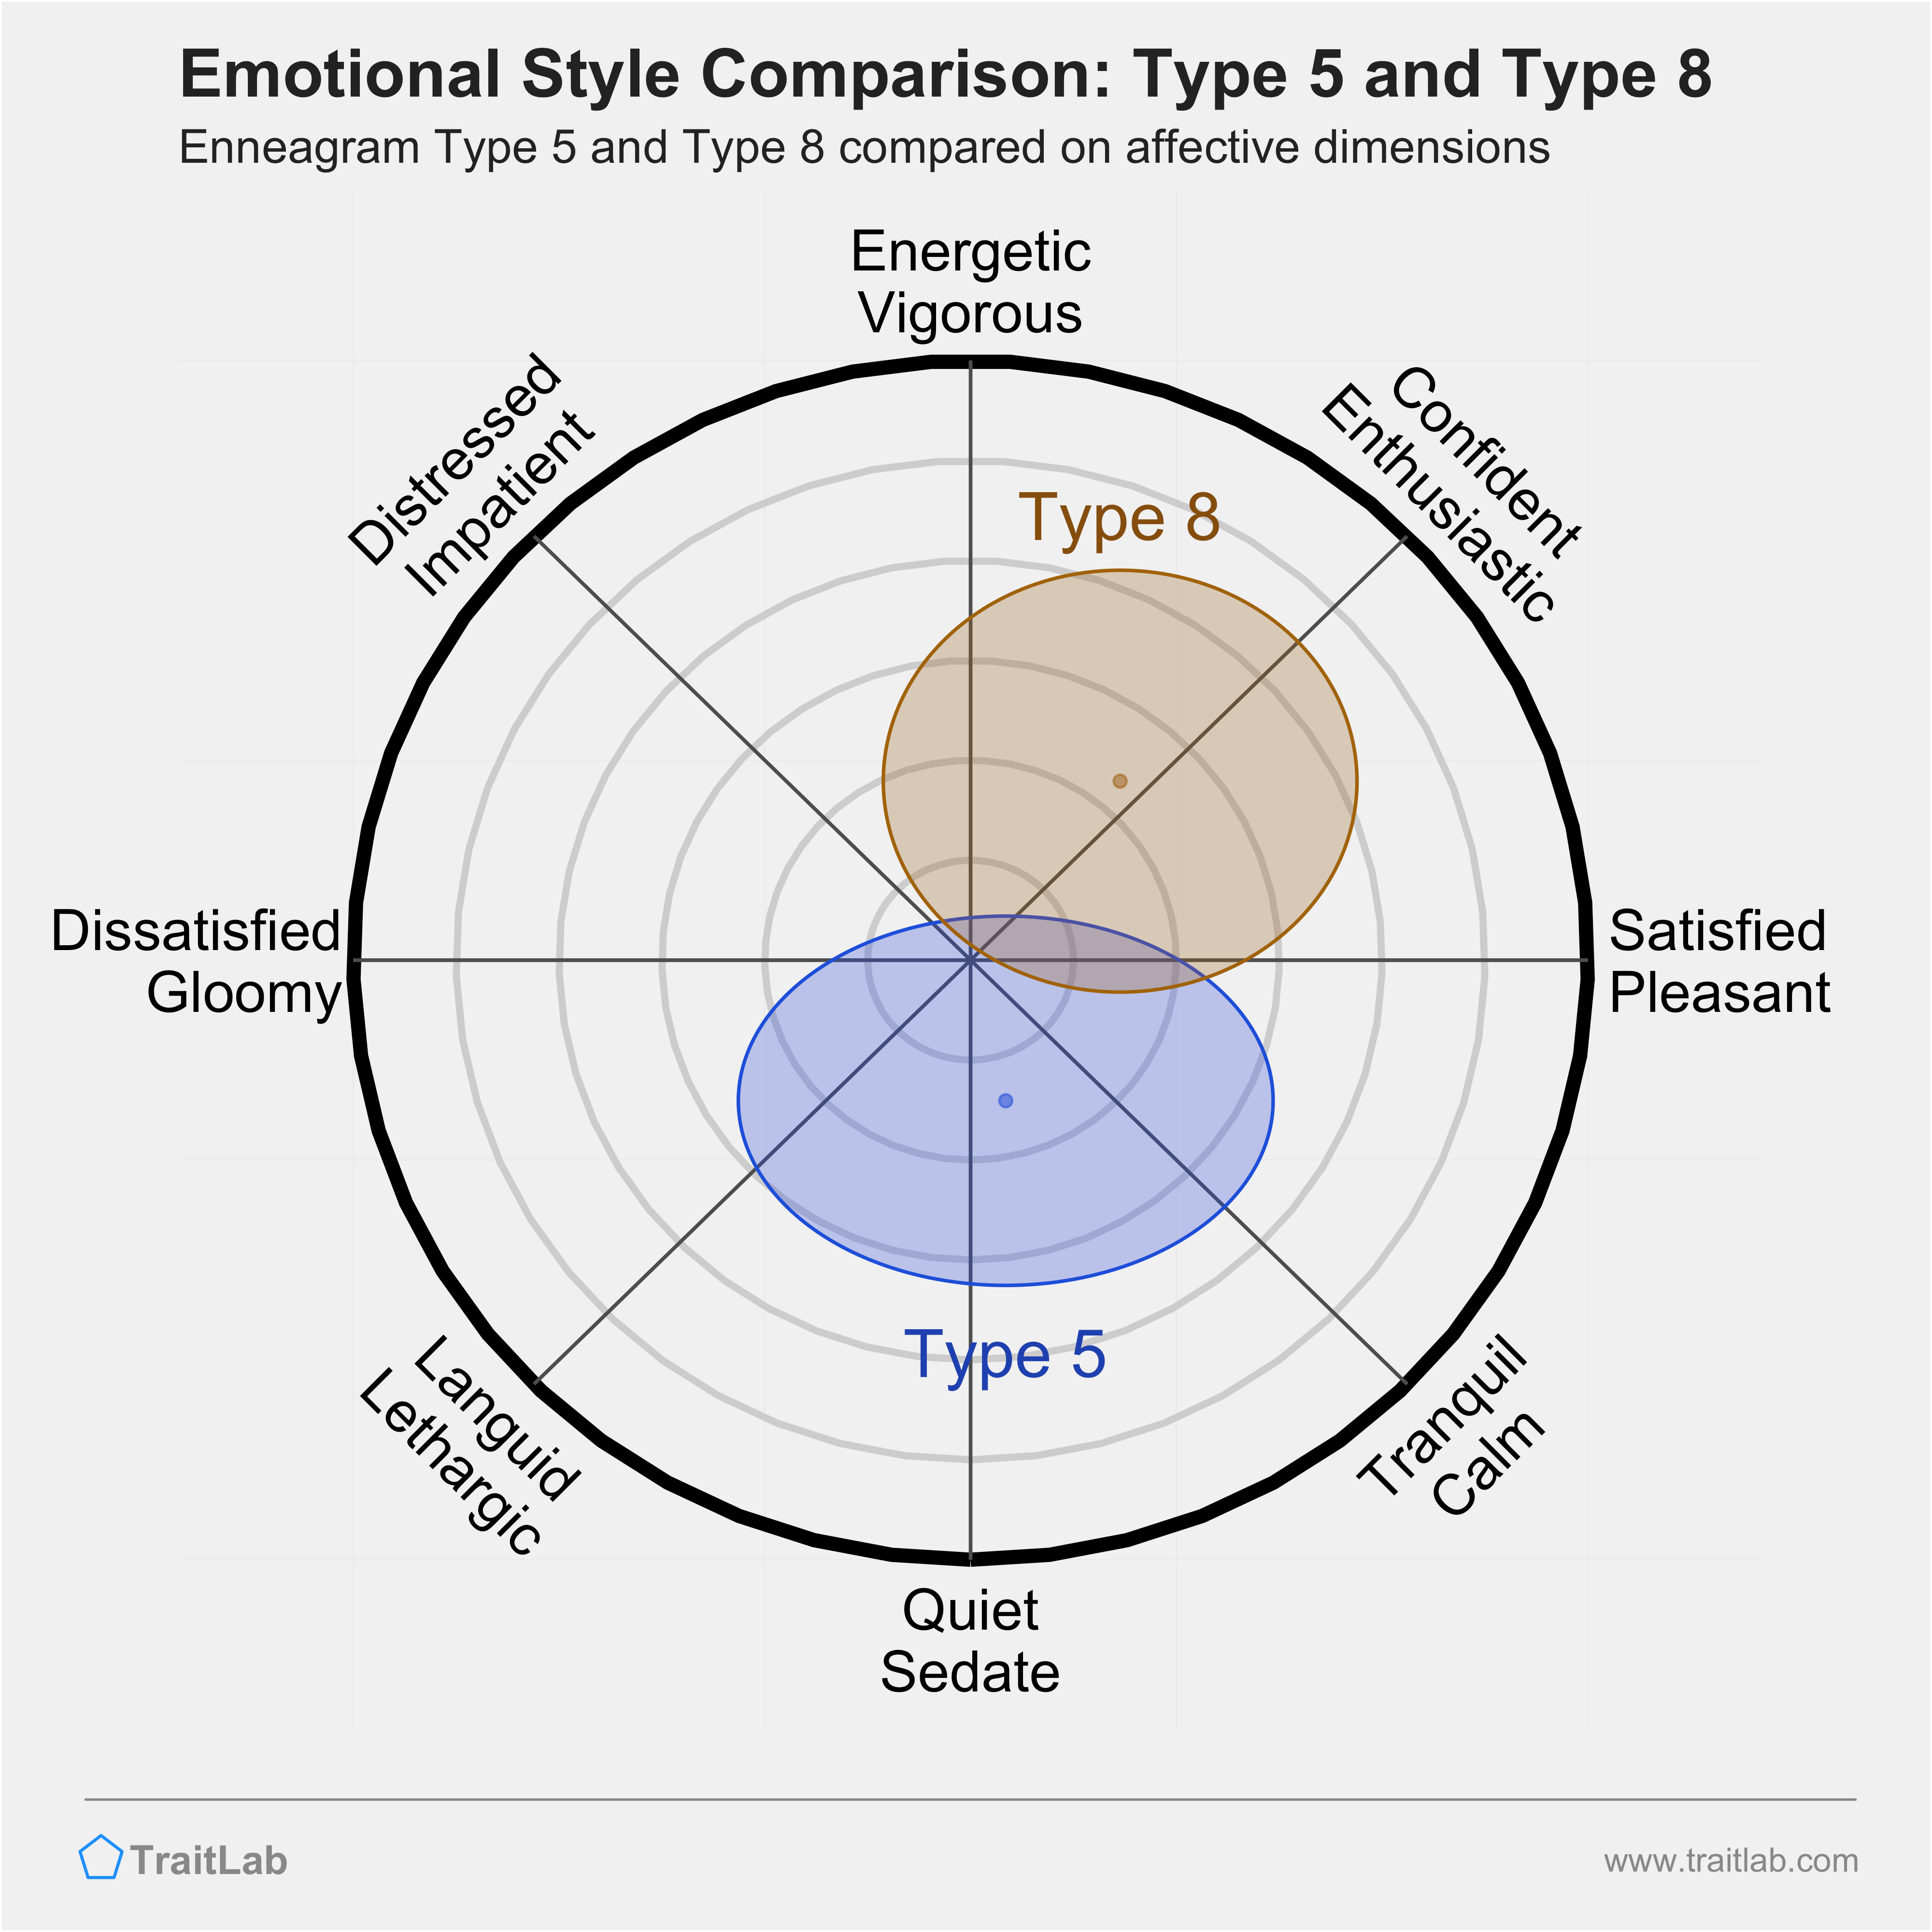 Type 5 and Type 8 comparison across emotional (affective) dimensions